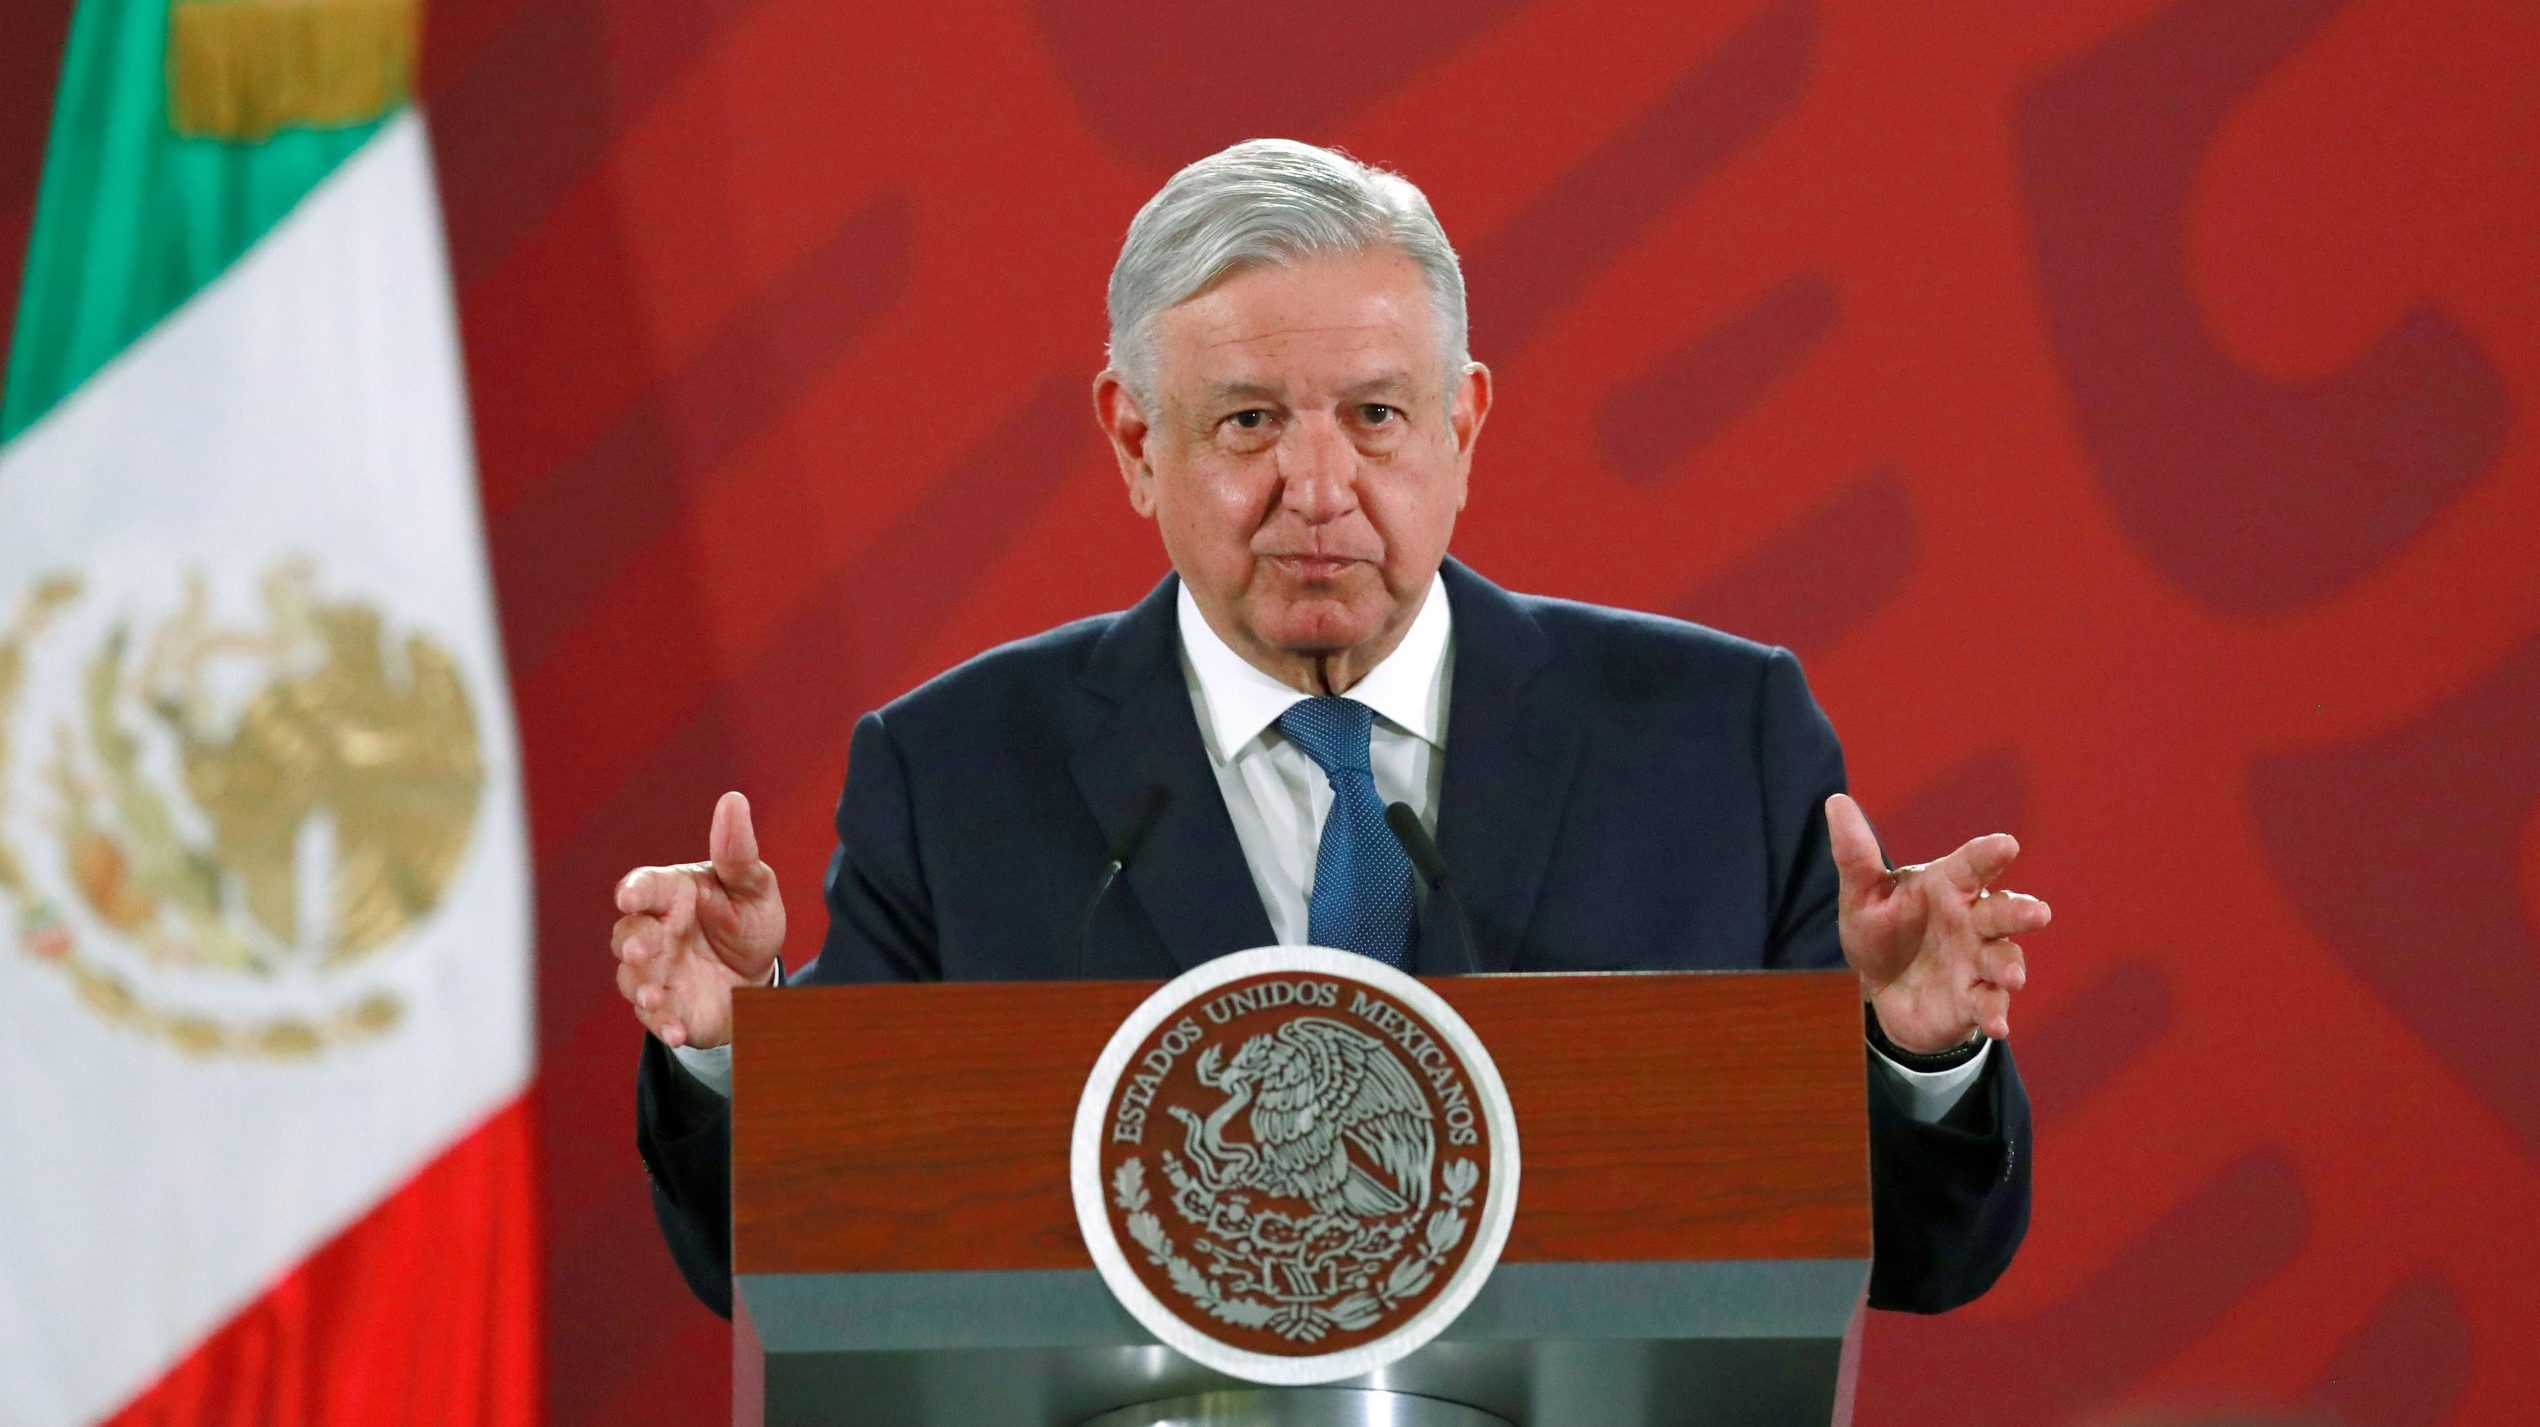 How much does Mexico’s president really think like Pope Francis?